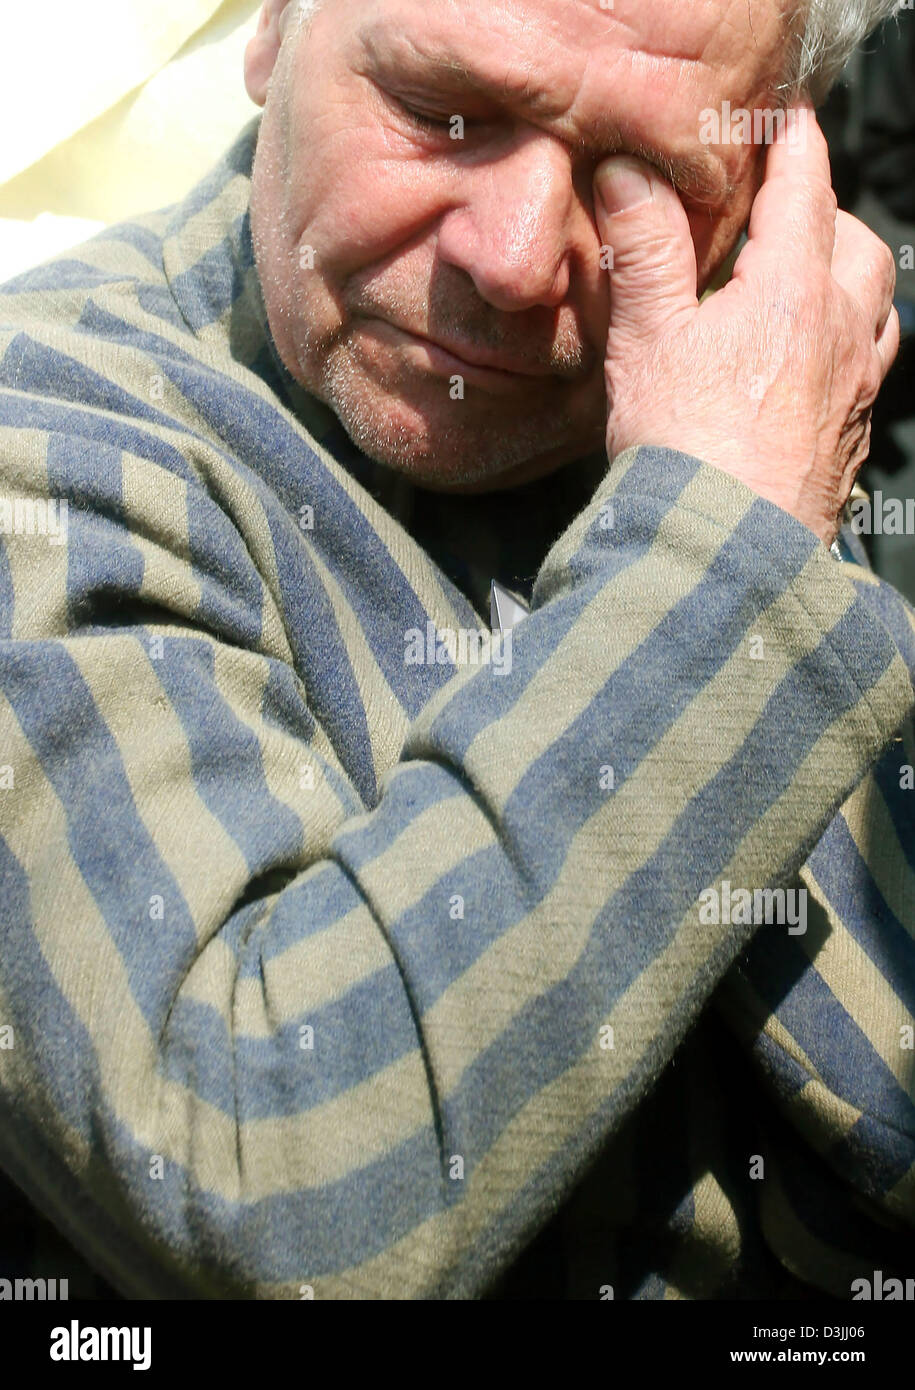 (dpa) - A concentration camp survivor cries as he participates in a ceremonial act at the memorial site of former Sachsenhausen concentration camp near Oranienburg, Germany, 17 April 2005. The memorial service commemorated the 60th anniversary of the liberation of camp Sachsenhausen. Stock Photo